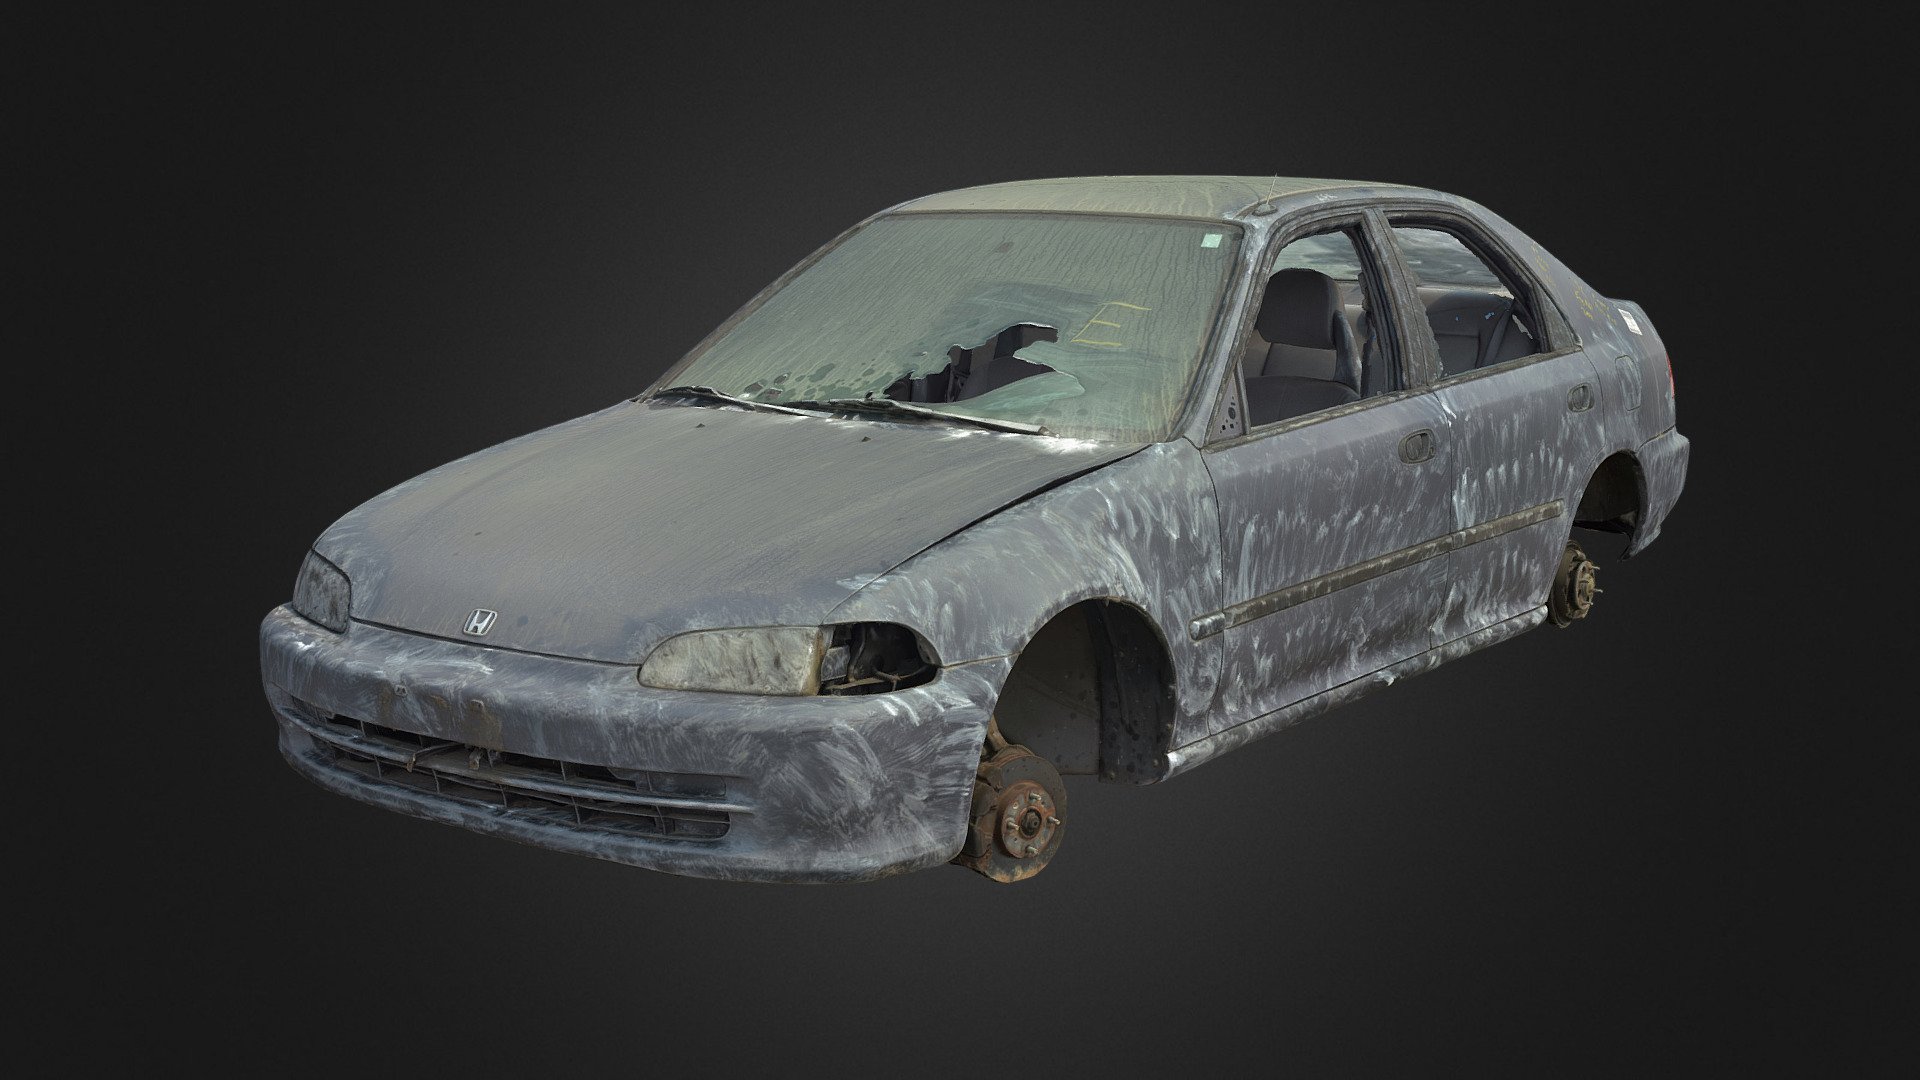 High-accuracy photoscan Intended for use as modeling reference.

Photos taken with my Nikon D3400 and polarizing filter

Created in RealityCapture from 4293 images - 1992-1995 Civic 4-door [Scan] - 3D model by Rush_Freak 3d model